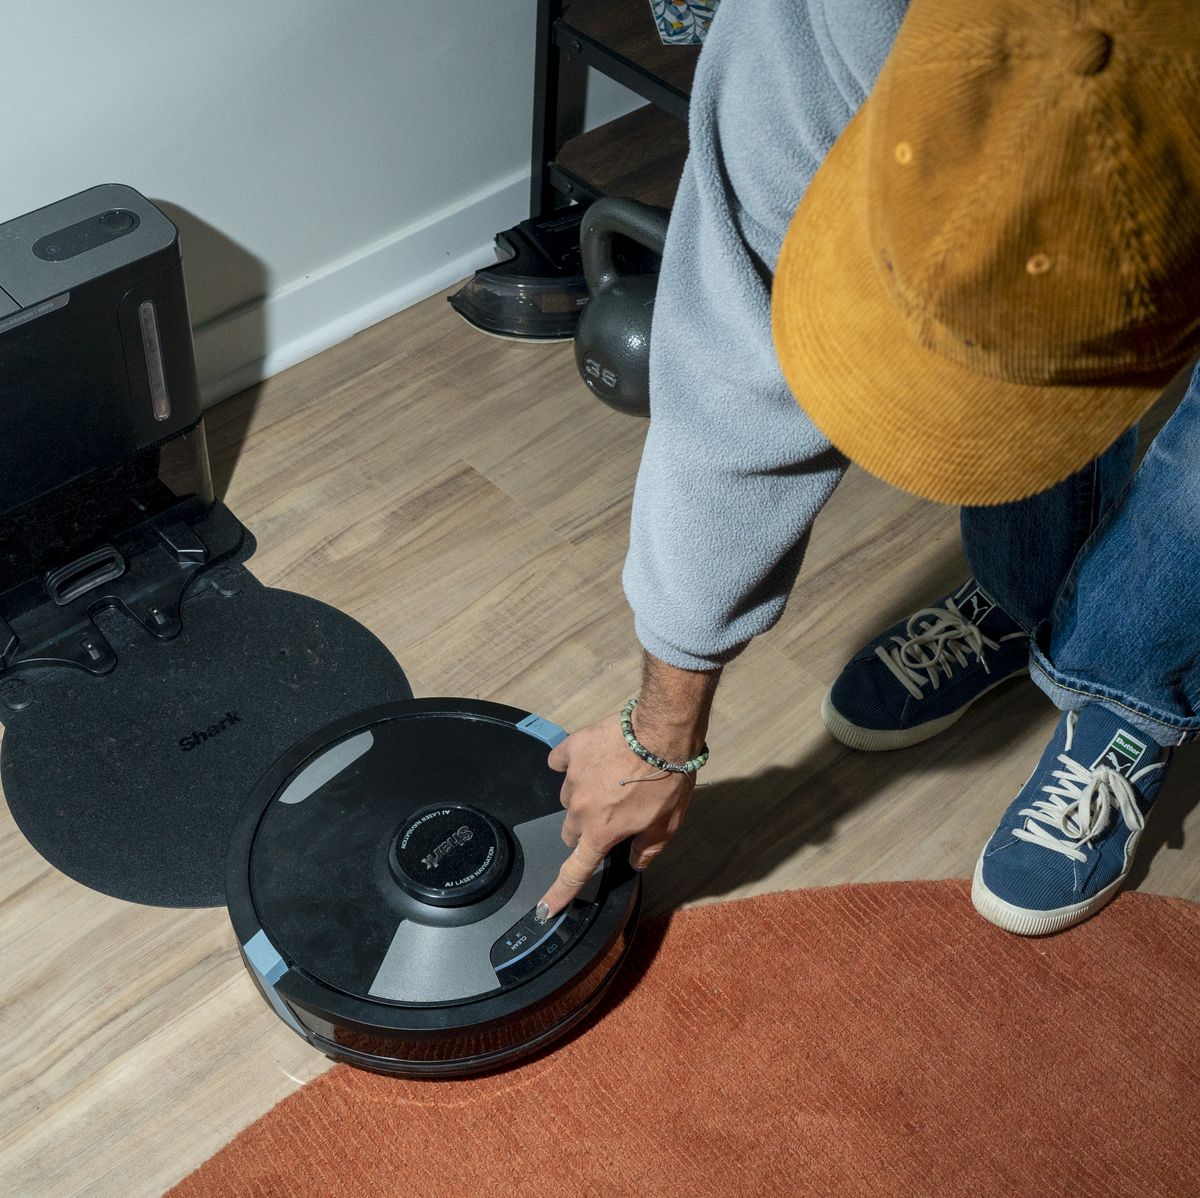 iRobot Roomba vs Shark: which robot vacuum is right for you?